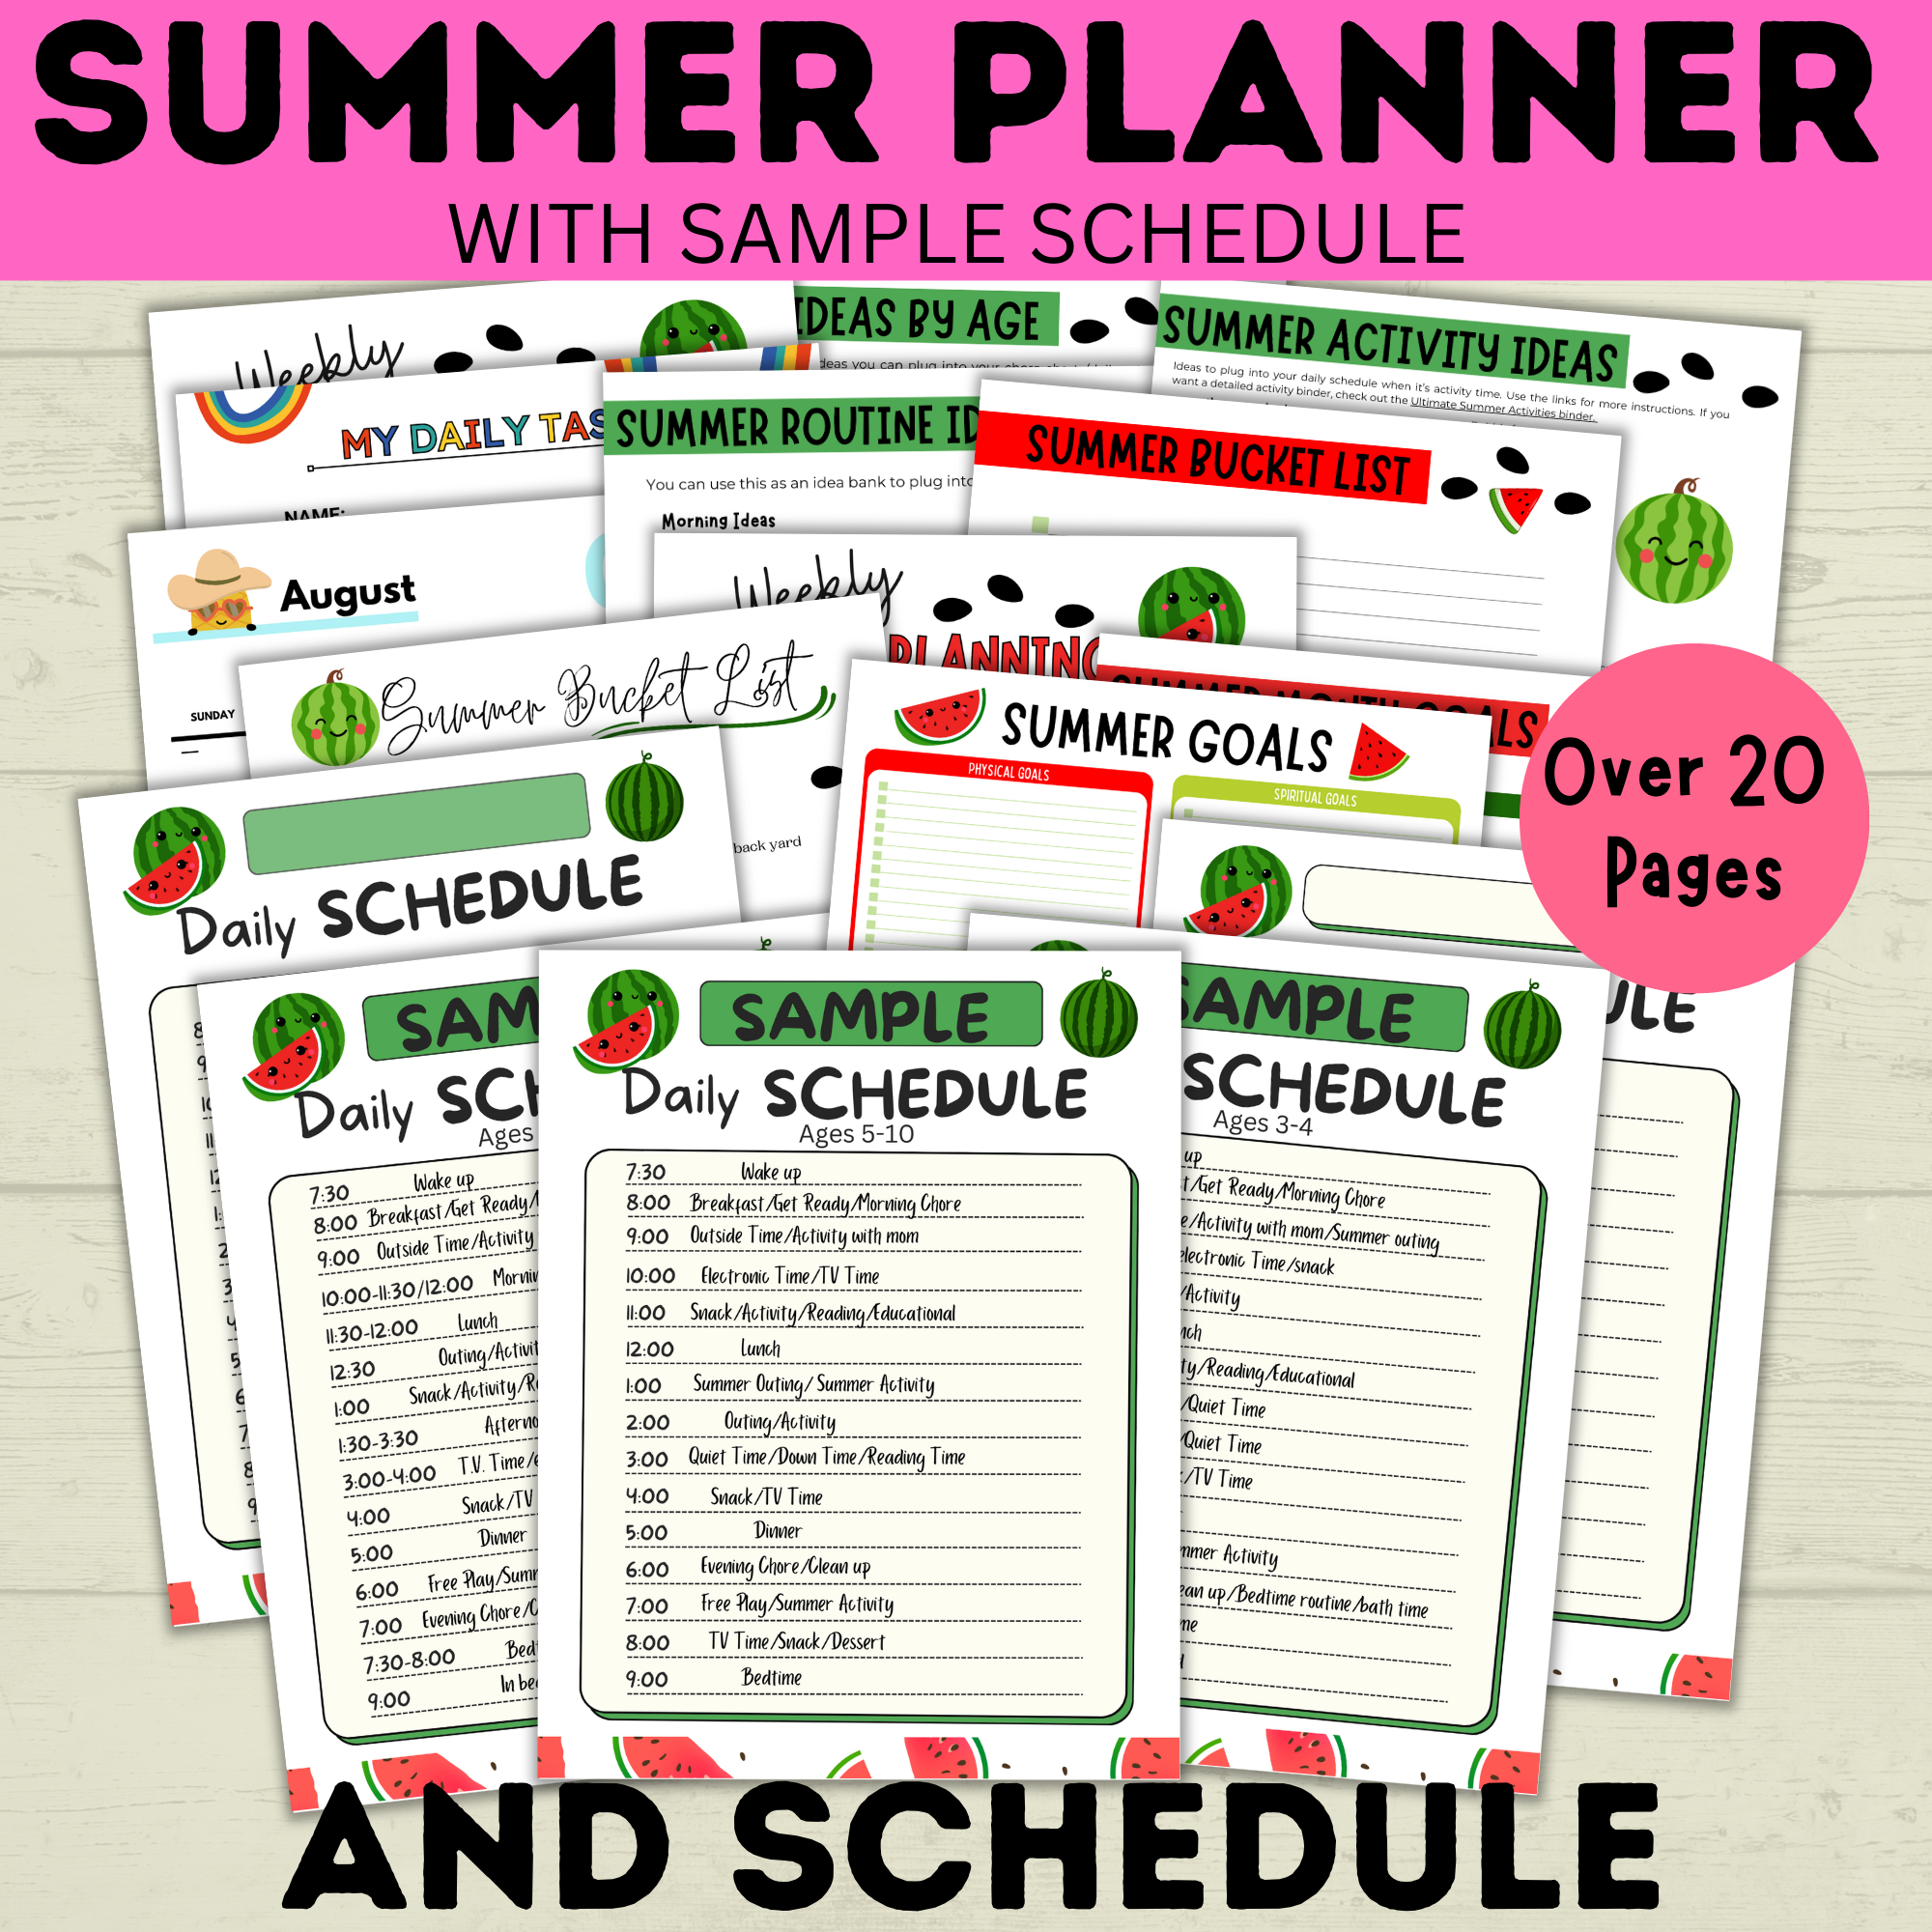 Summer planner with sample schedule mockup image.